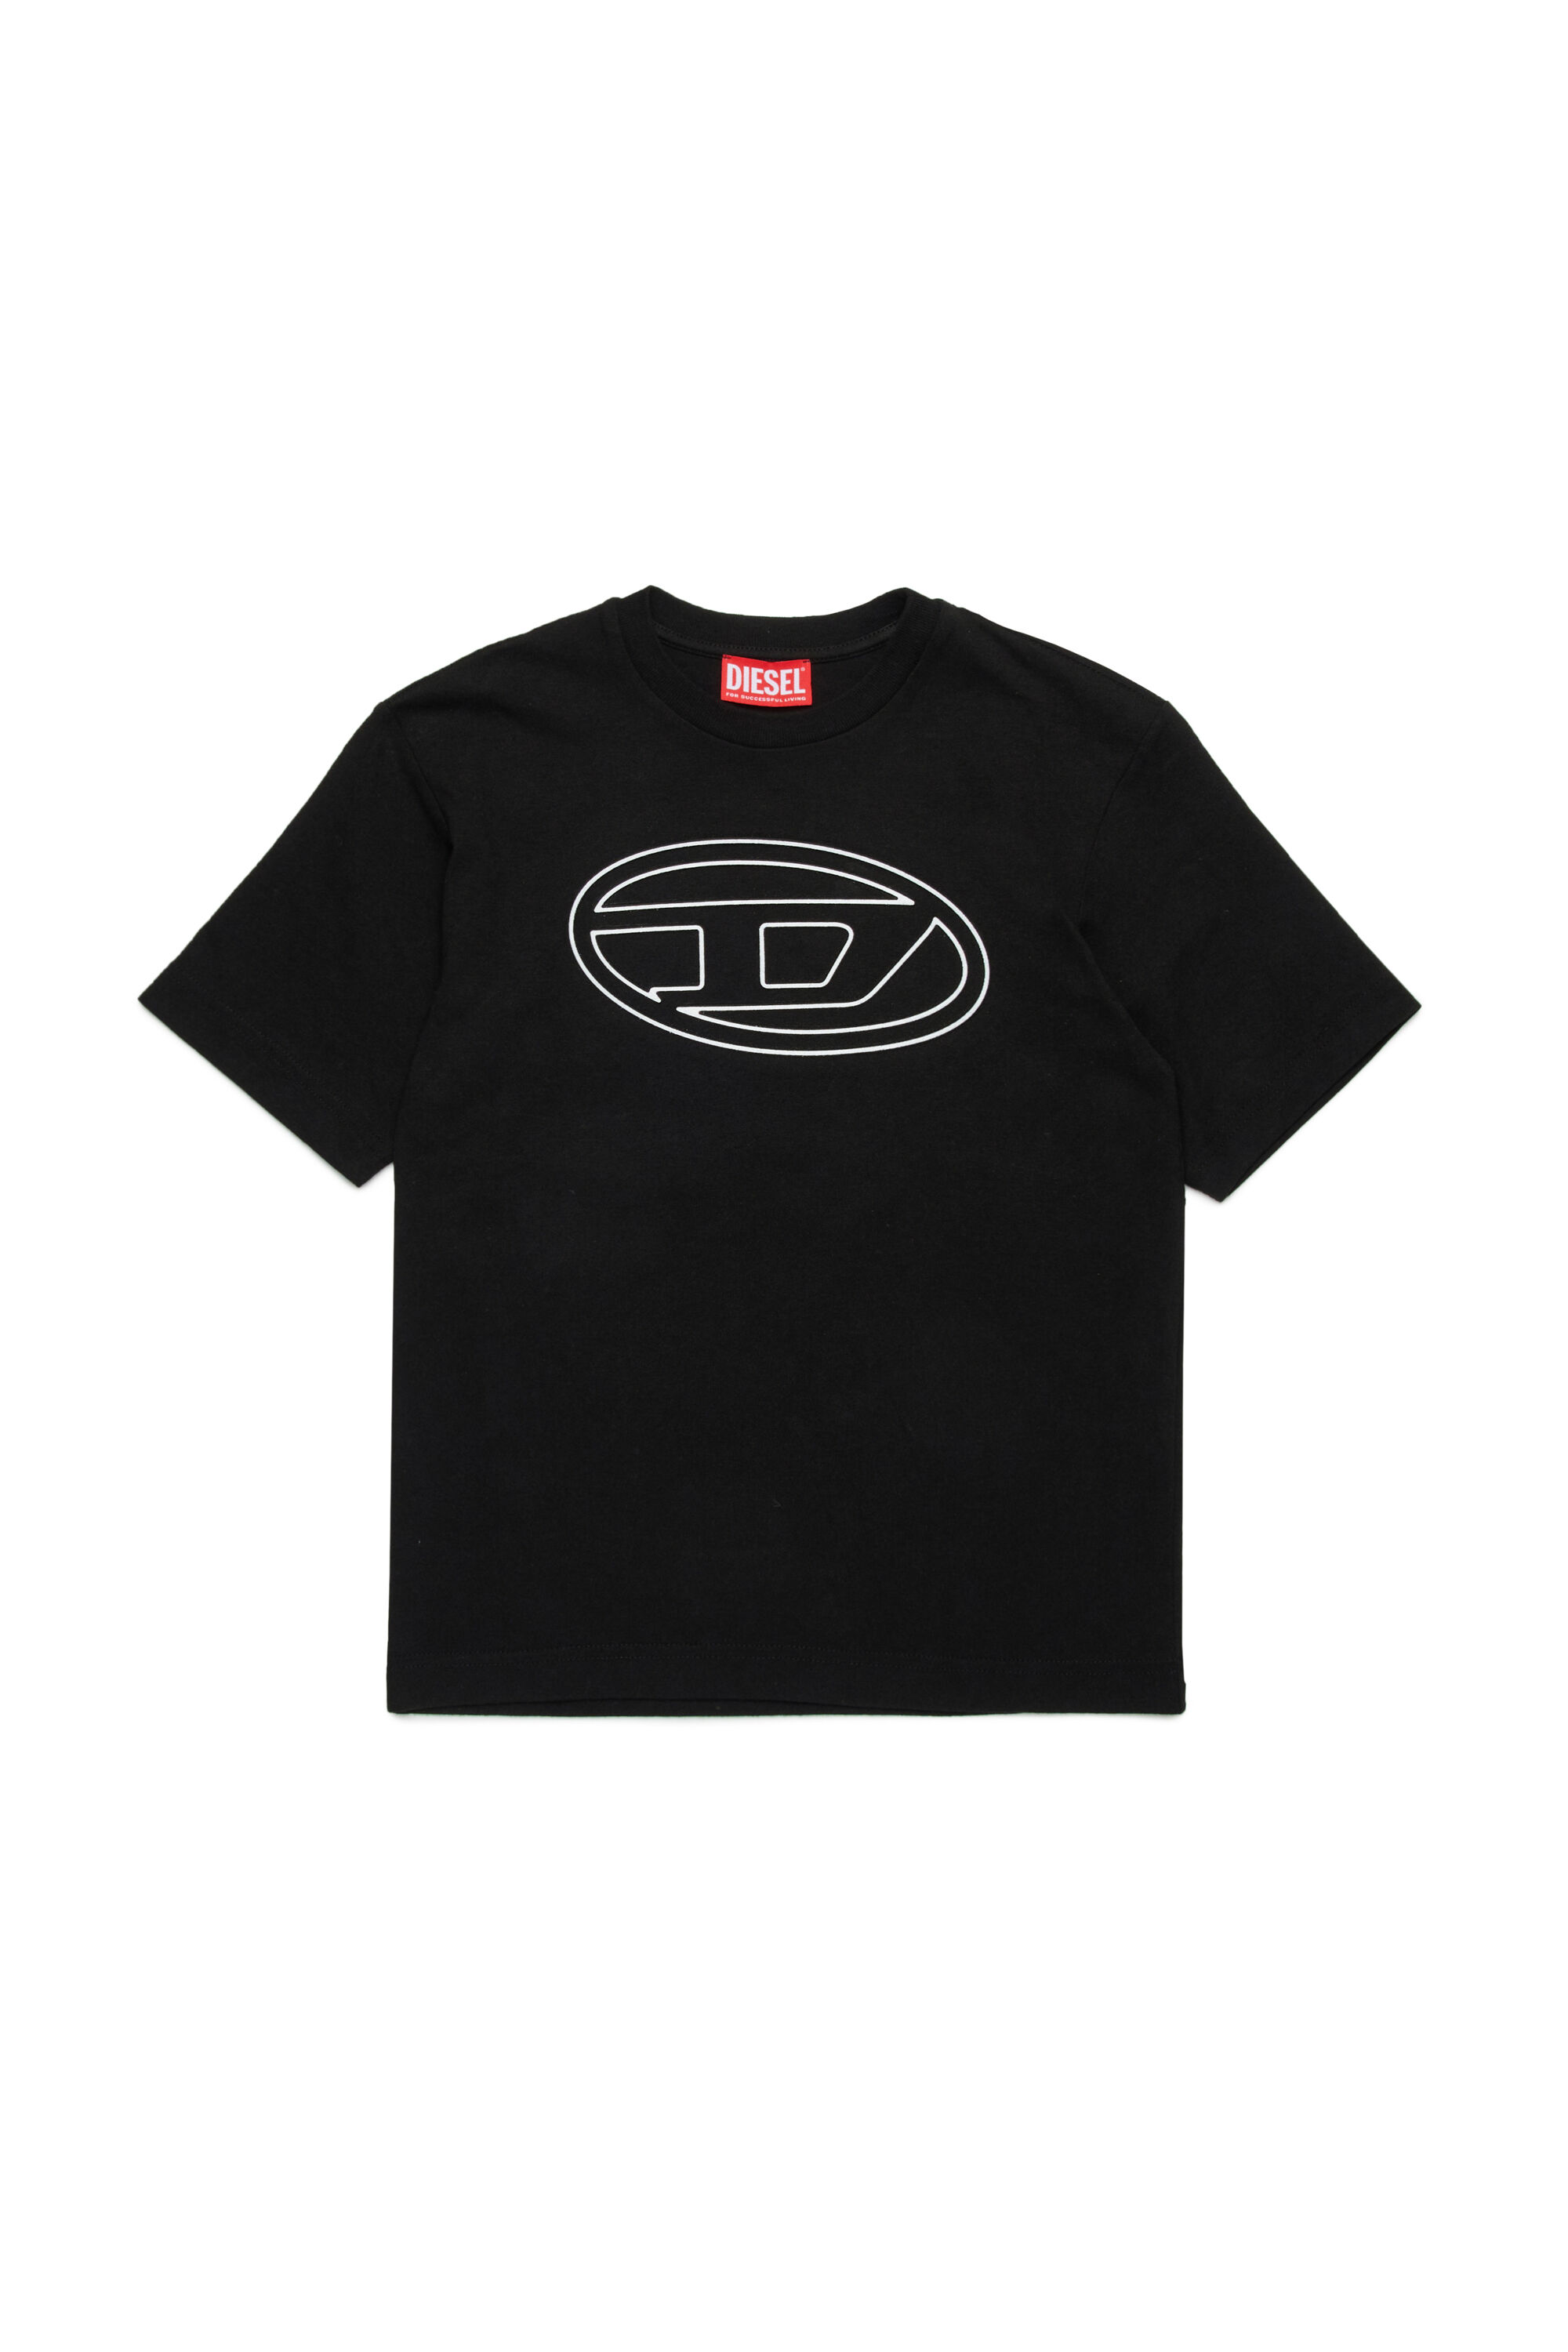 TJUSTBIGOVAL OVER T-shirt with Oval D outline logo｜ブラック 